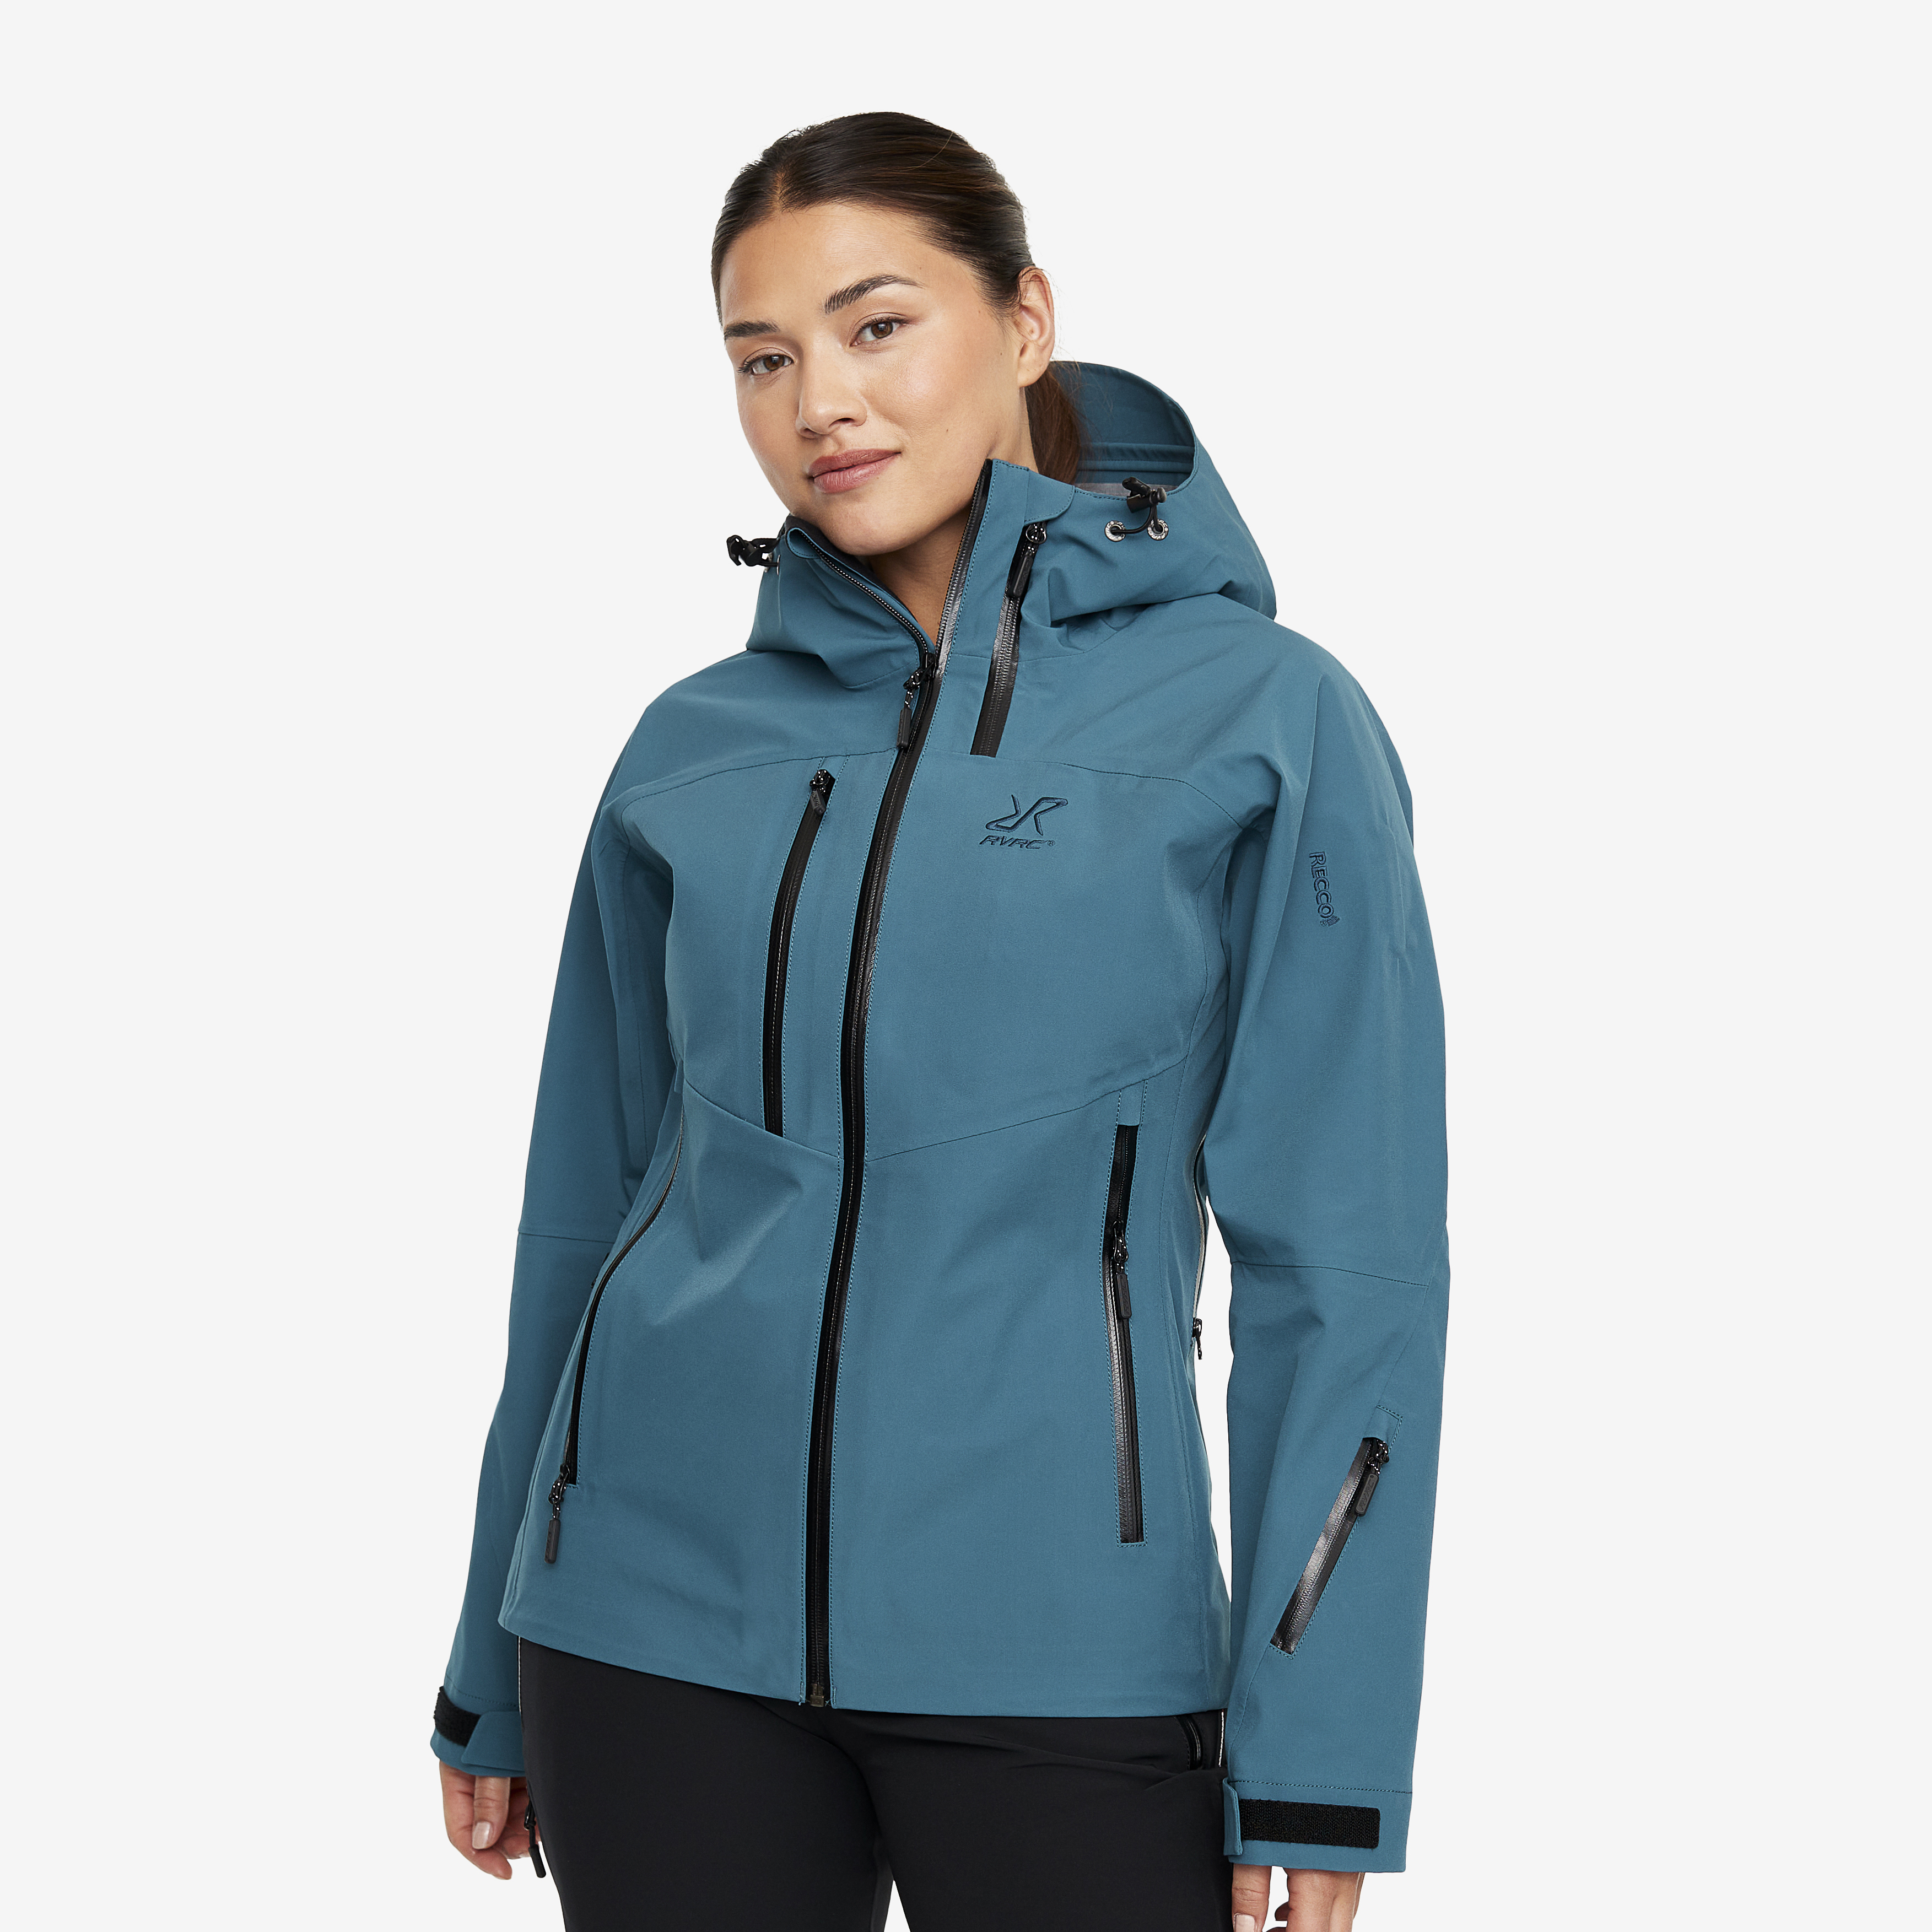 Cyclone Rescue Jacket 2.0 Ocean Teal Donna